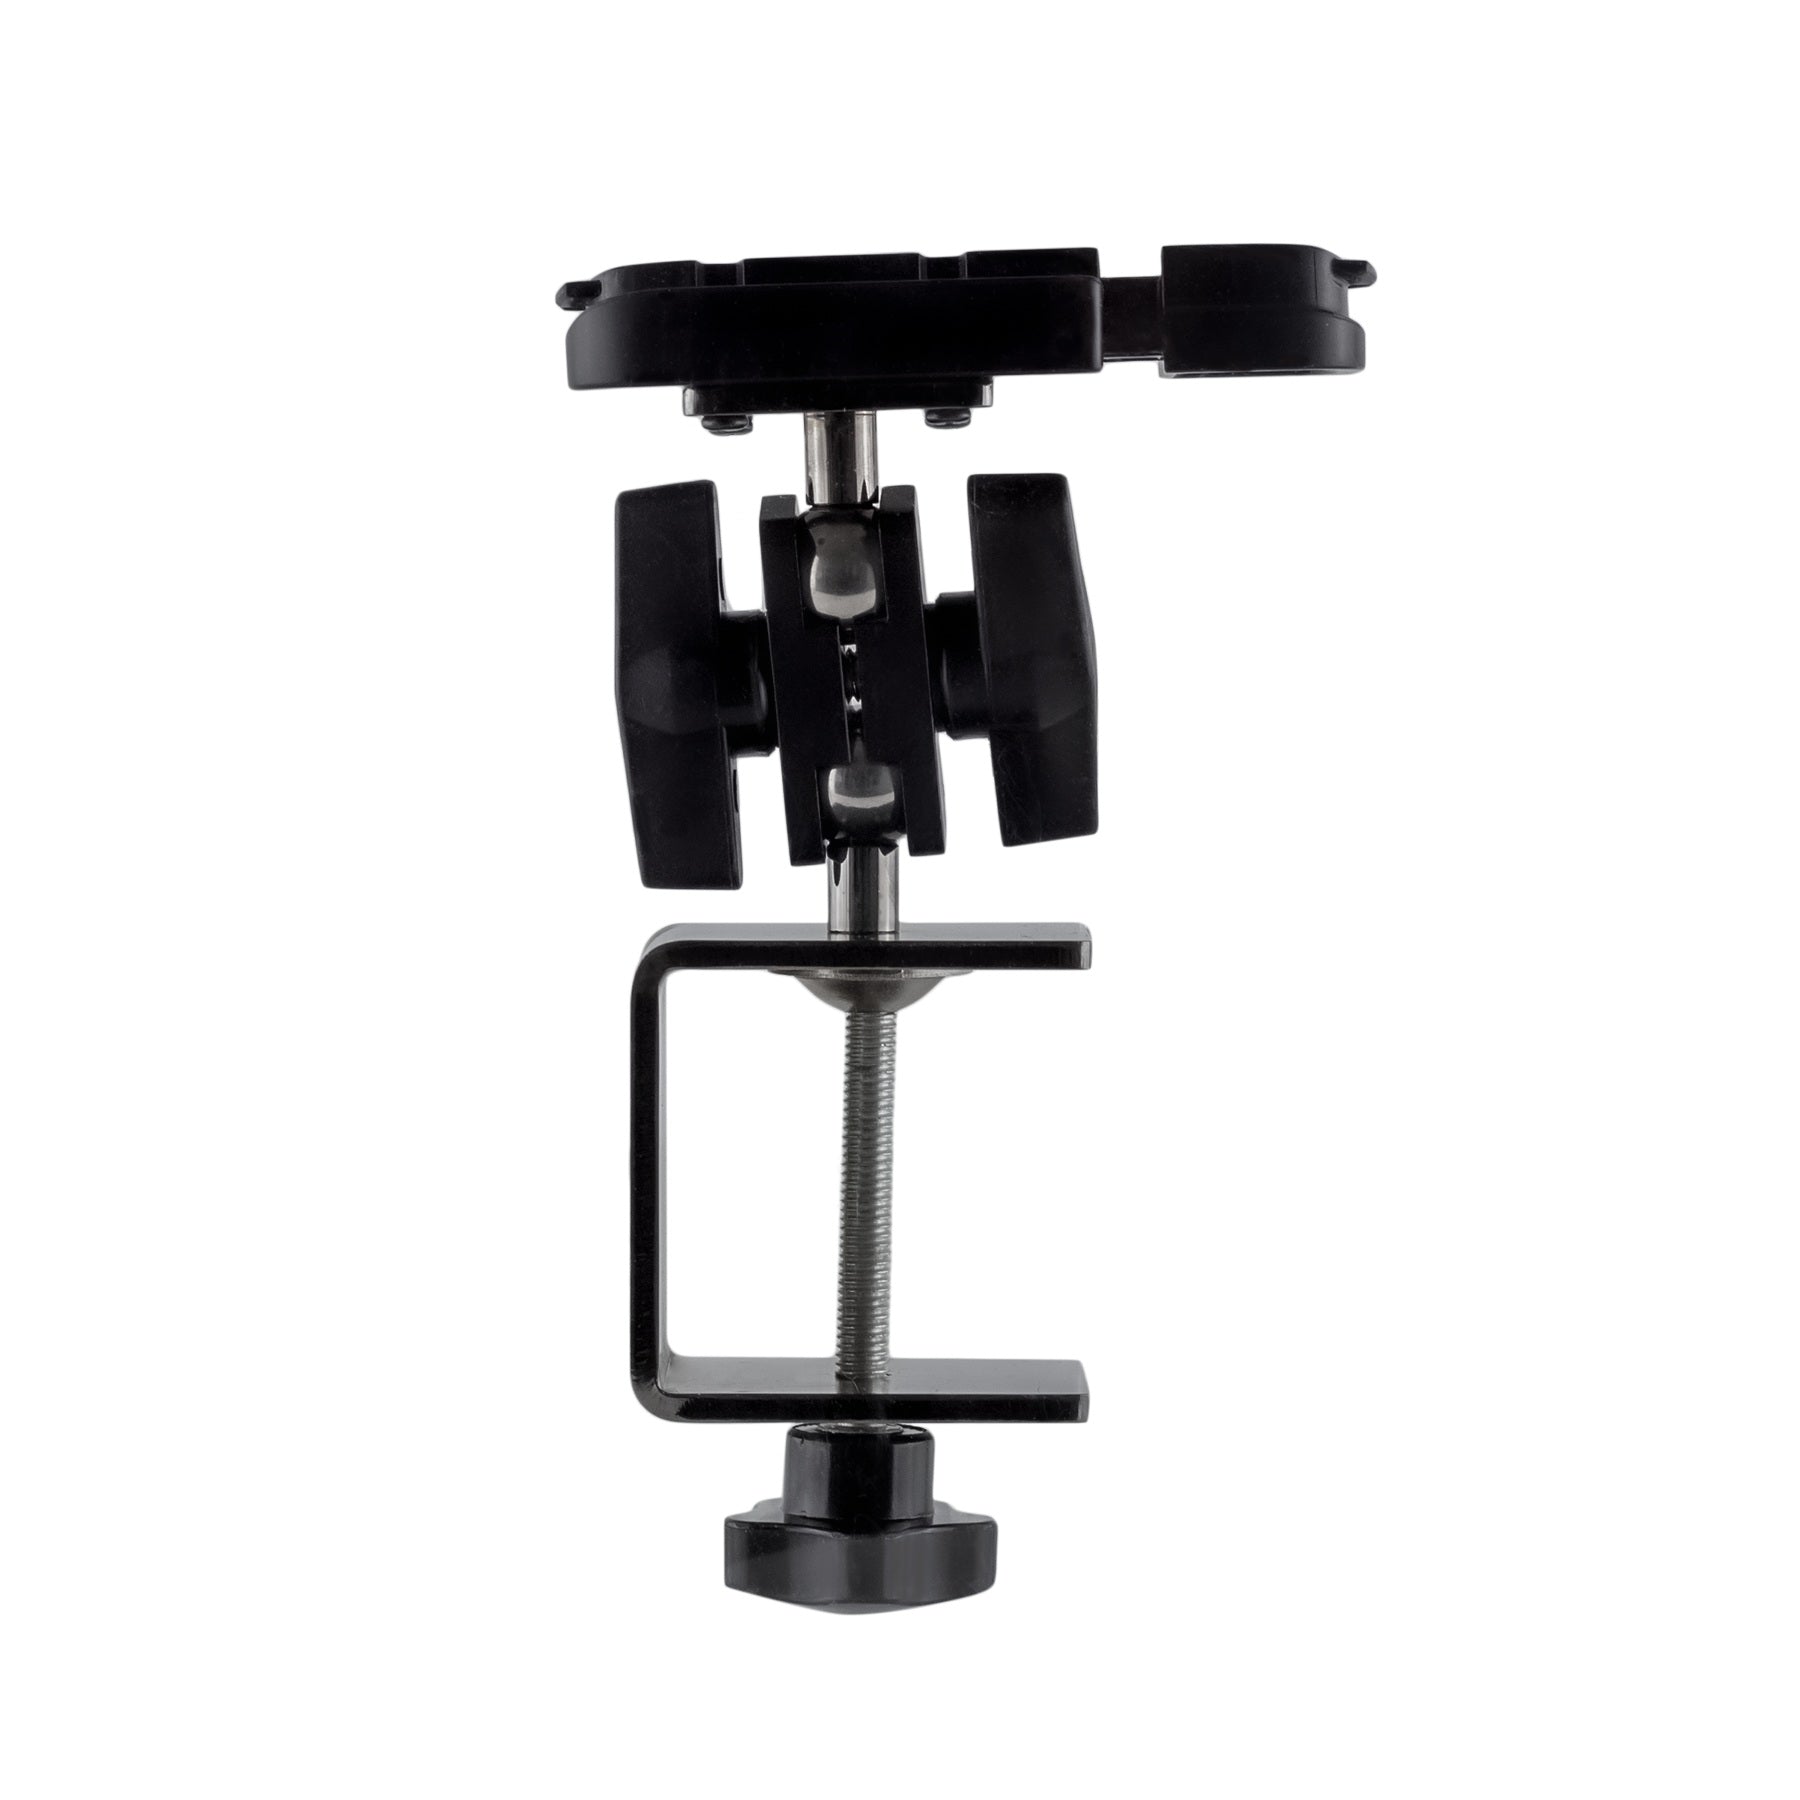 A side view of the Kiiroo Keon Table Clamp.